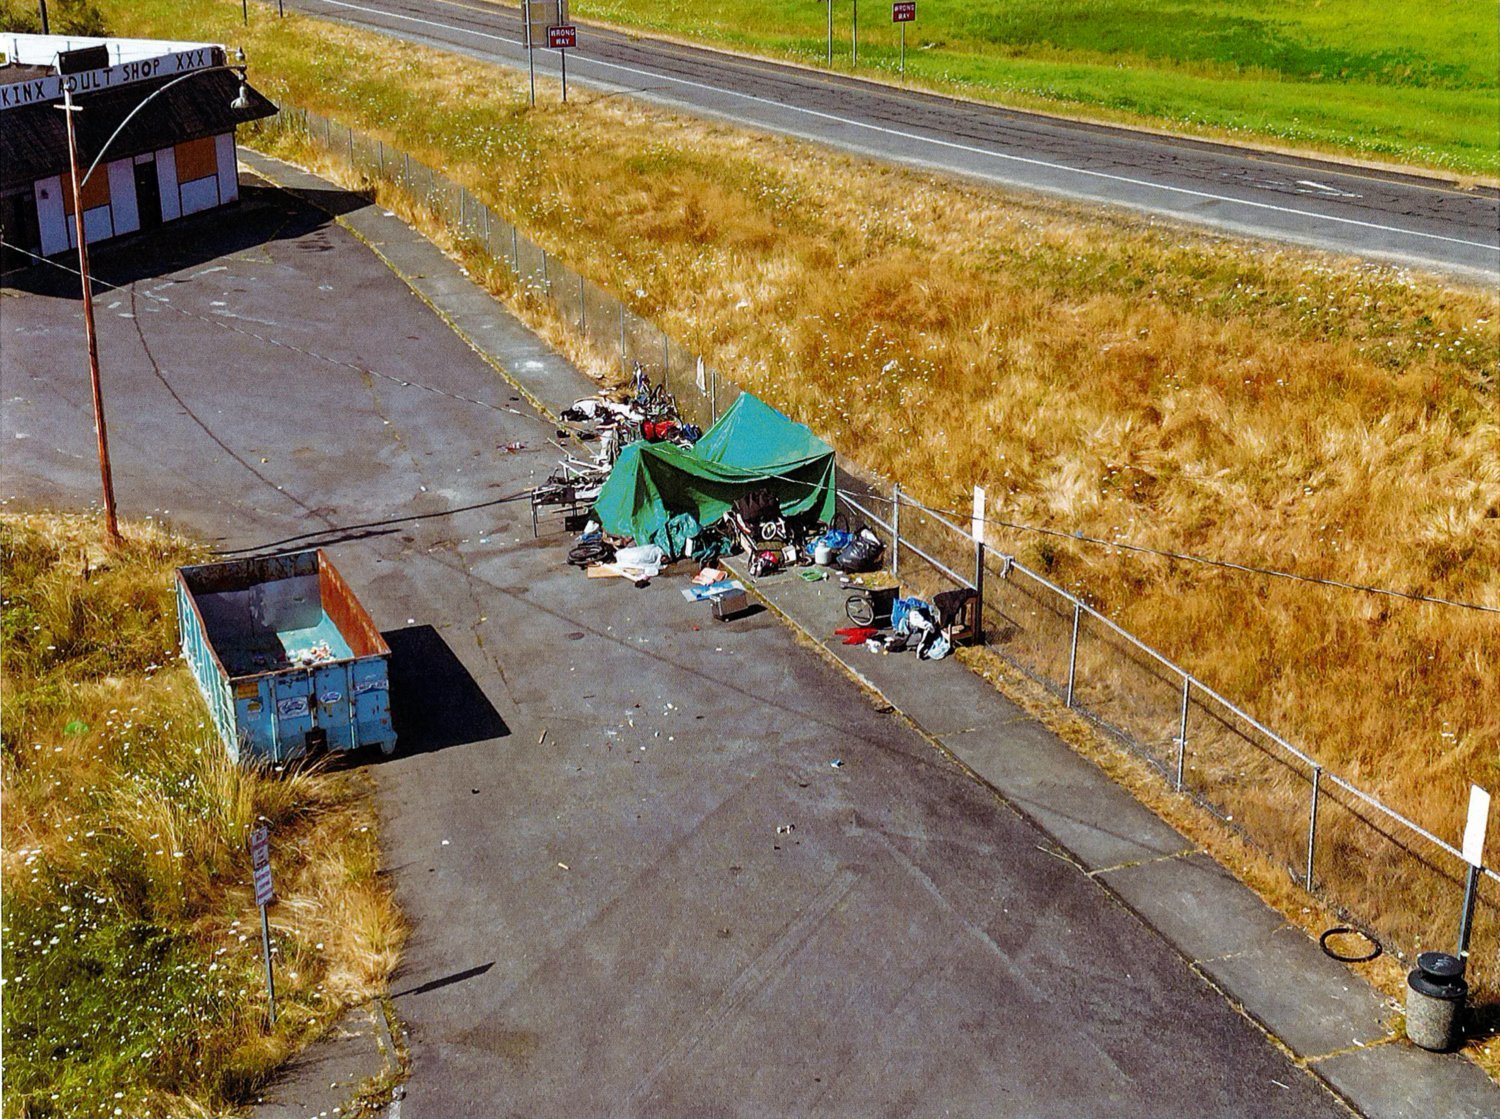 FILE PHOTO — A homeless encampment that was located on private property near the park and ride on Main Street in Chehalis, next to Interstate 5 Exit 77, was cleaned up last year.